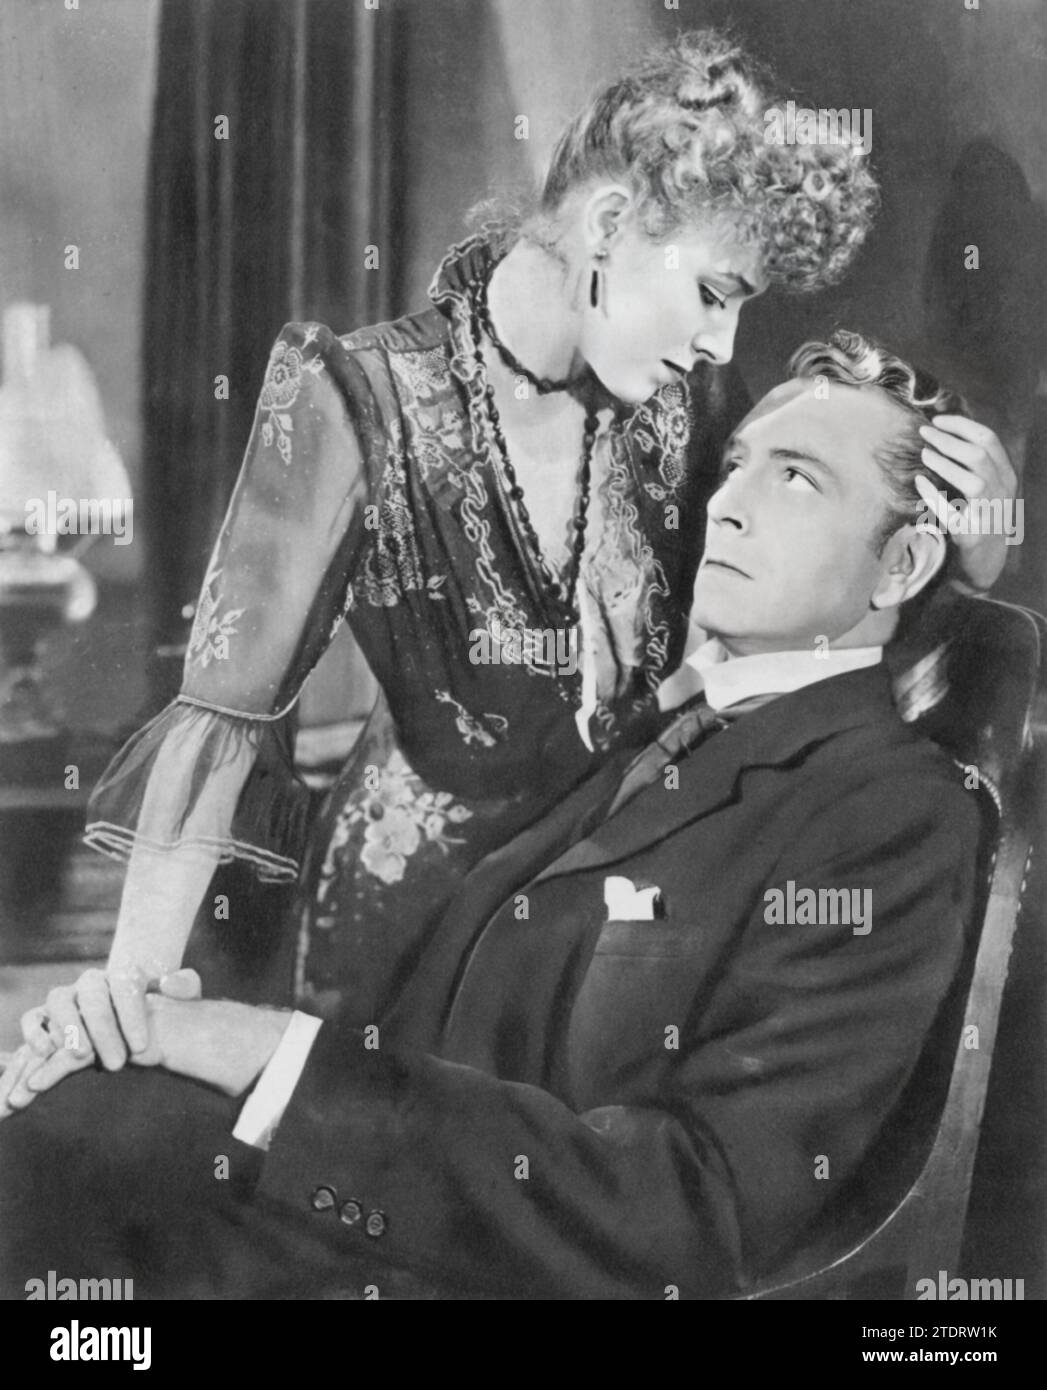 Eleanor Parker and Paul Henreid star in the film adaptation of W. Somerset Maugham's novel 'Of Human Bondage' (1946). In this drama, Henreid plays medical student Philip Carey, who becomes obsessively in love with Mildred Rogers, a manipulative waitress portrayed by Parker. The film delves into the complexities of unrequited love, obsession, and self-destruction. Stock Photo